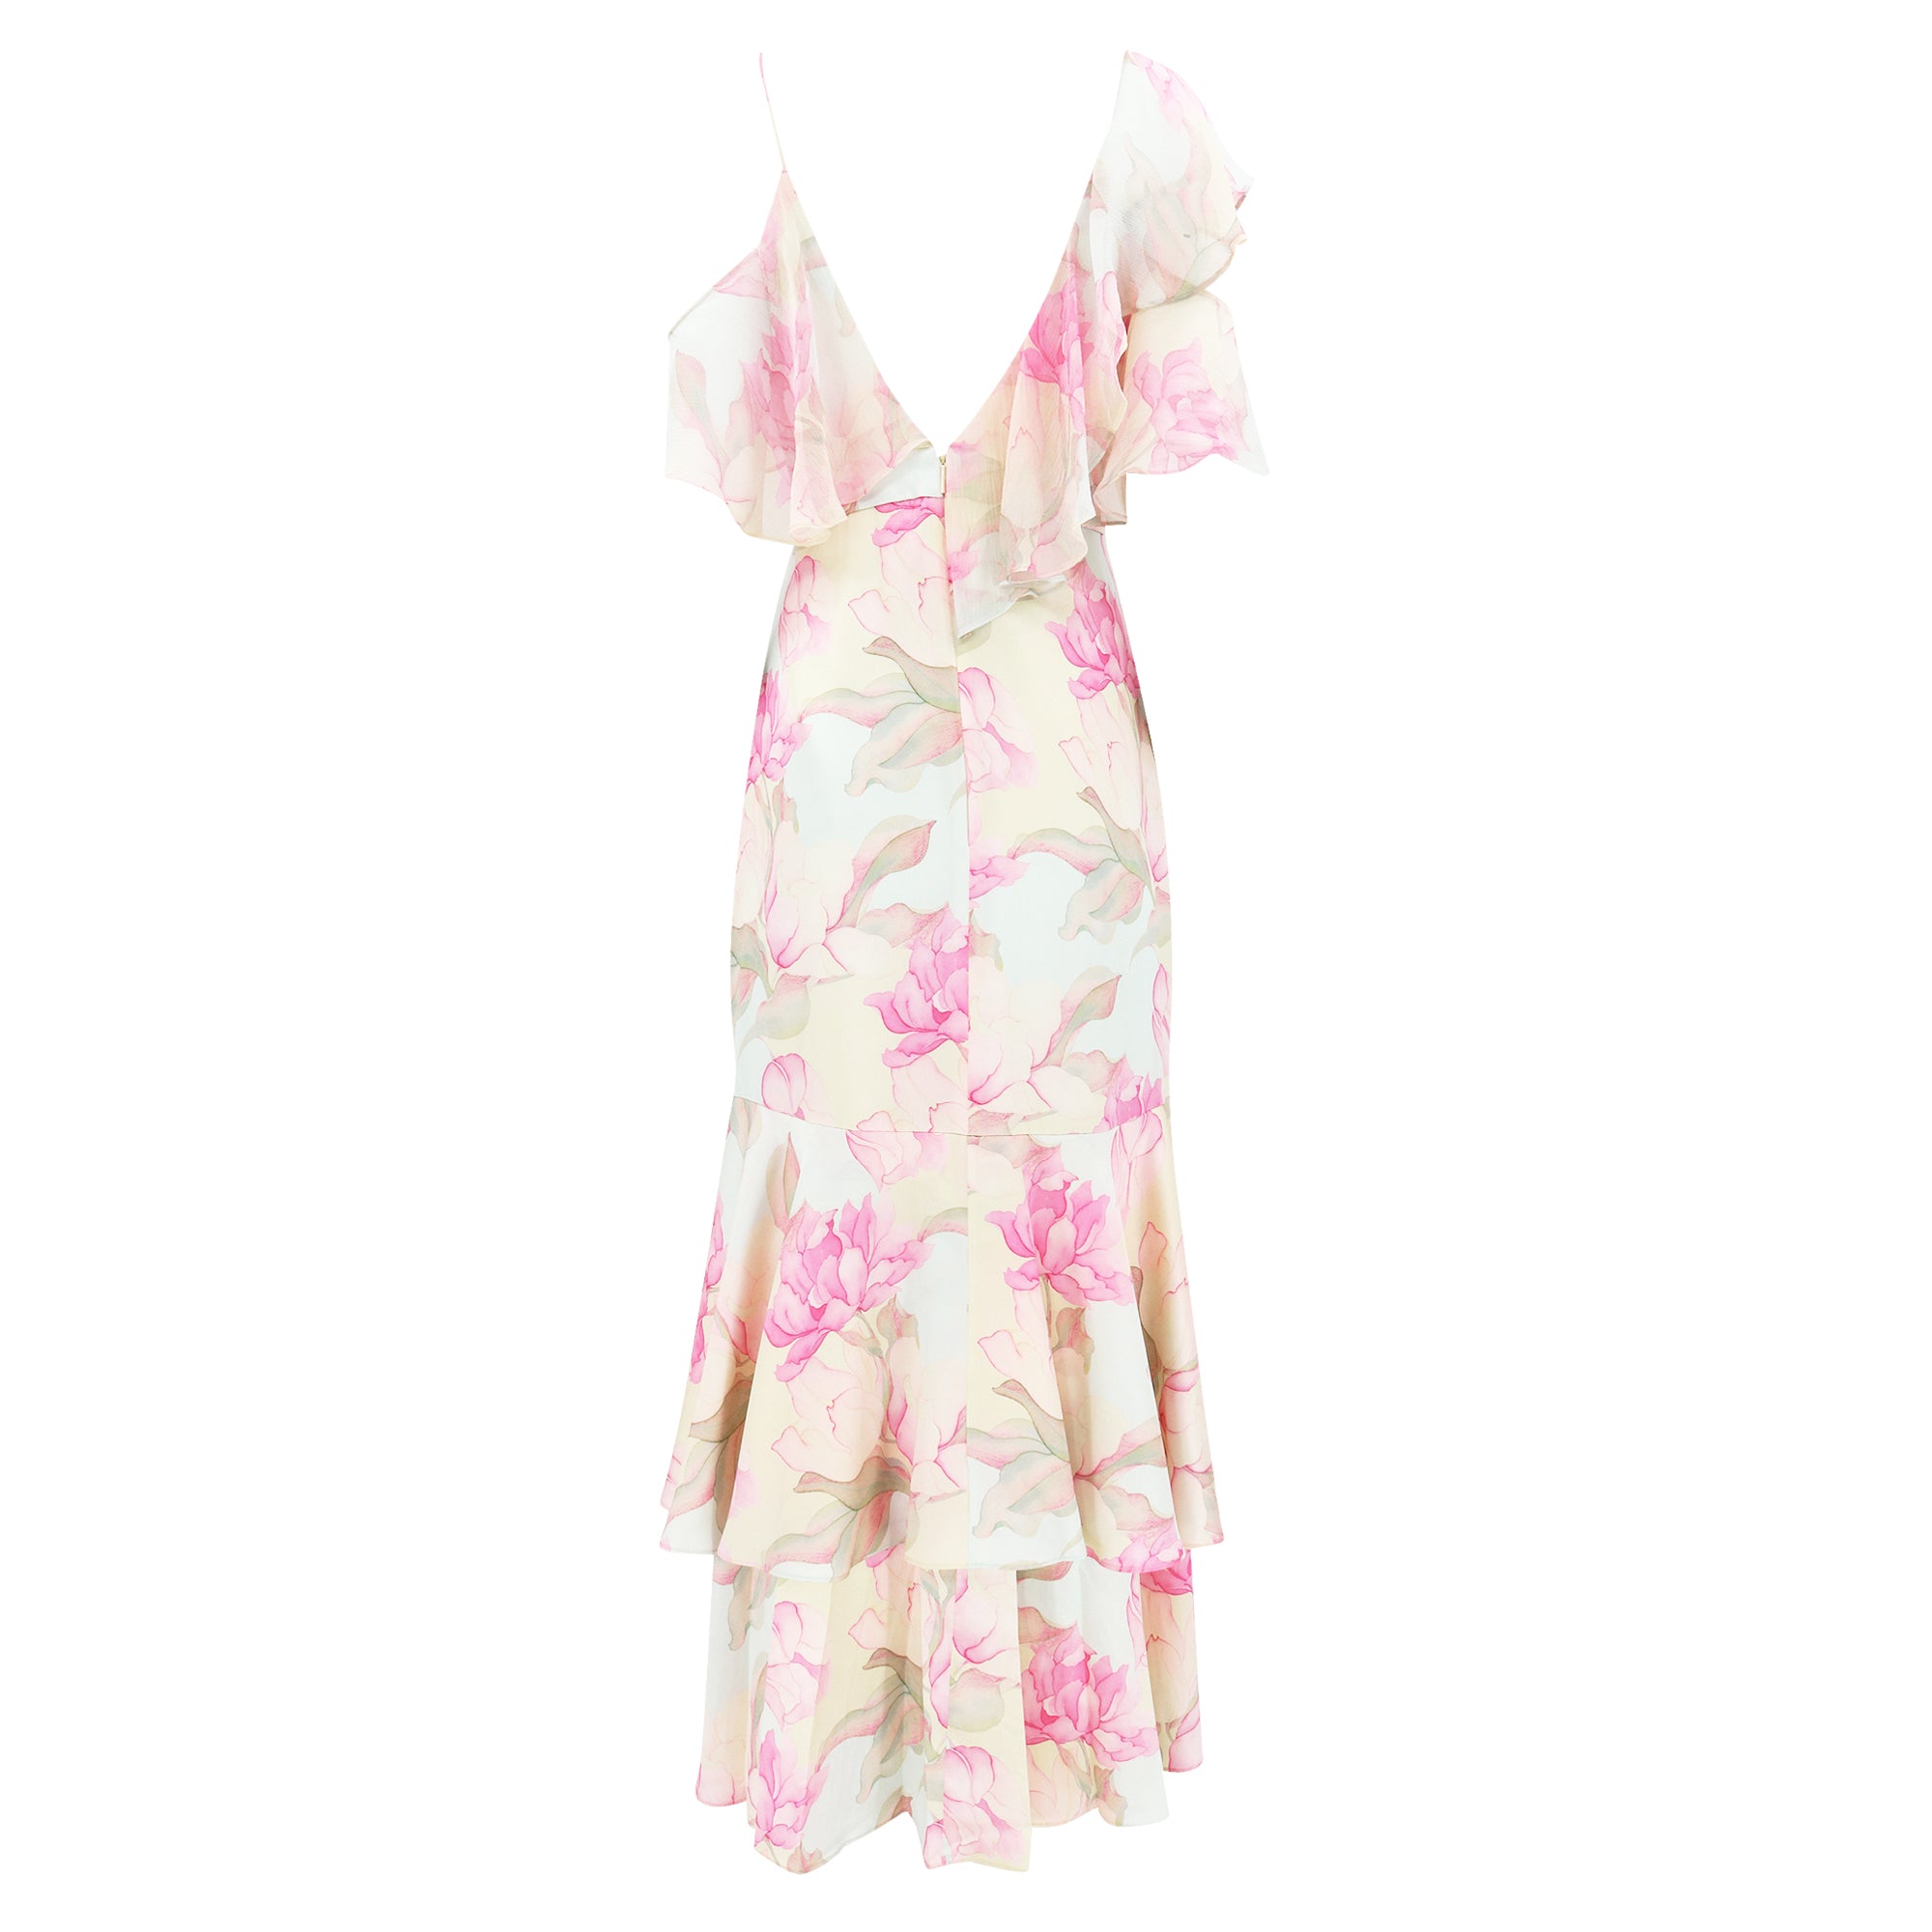 Anabelle Dress - Waterlily Pink